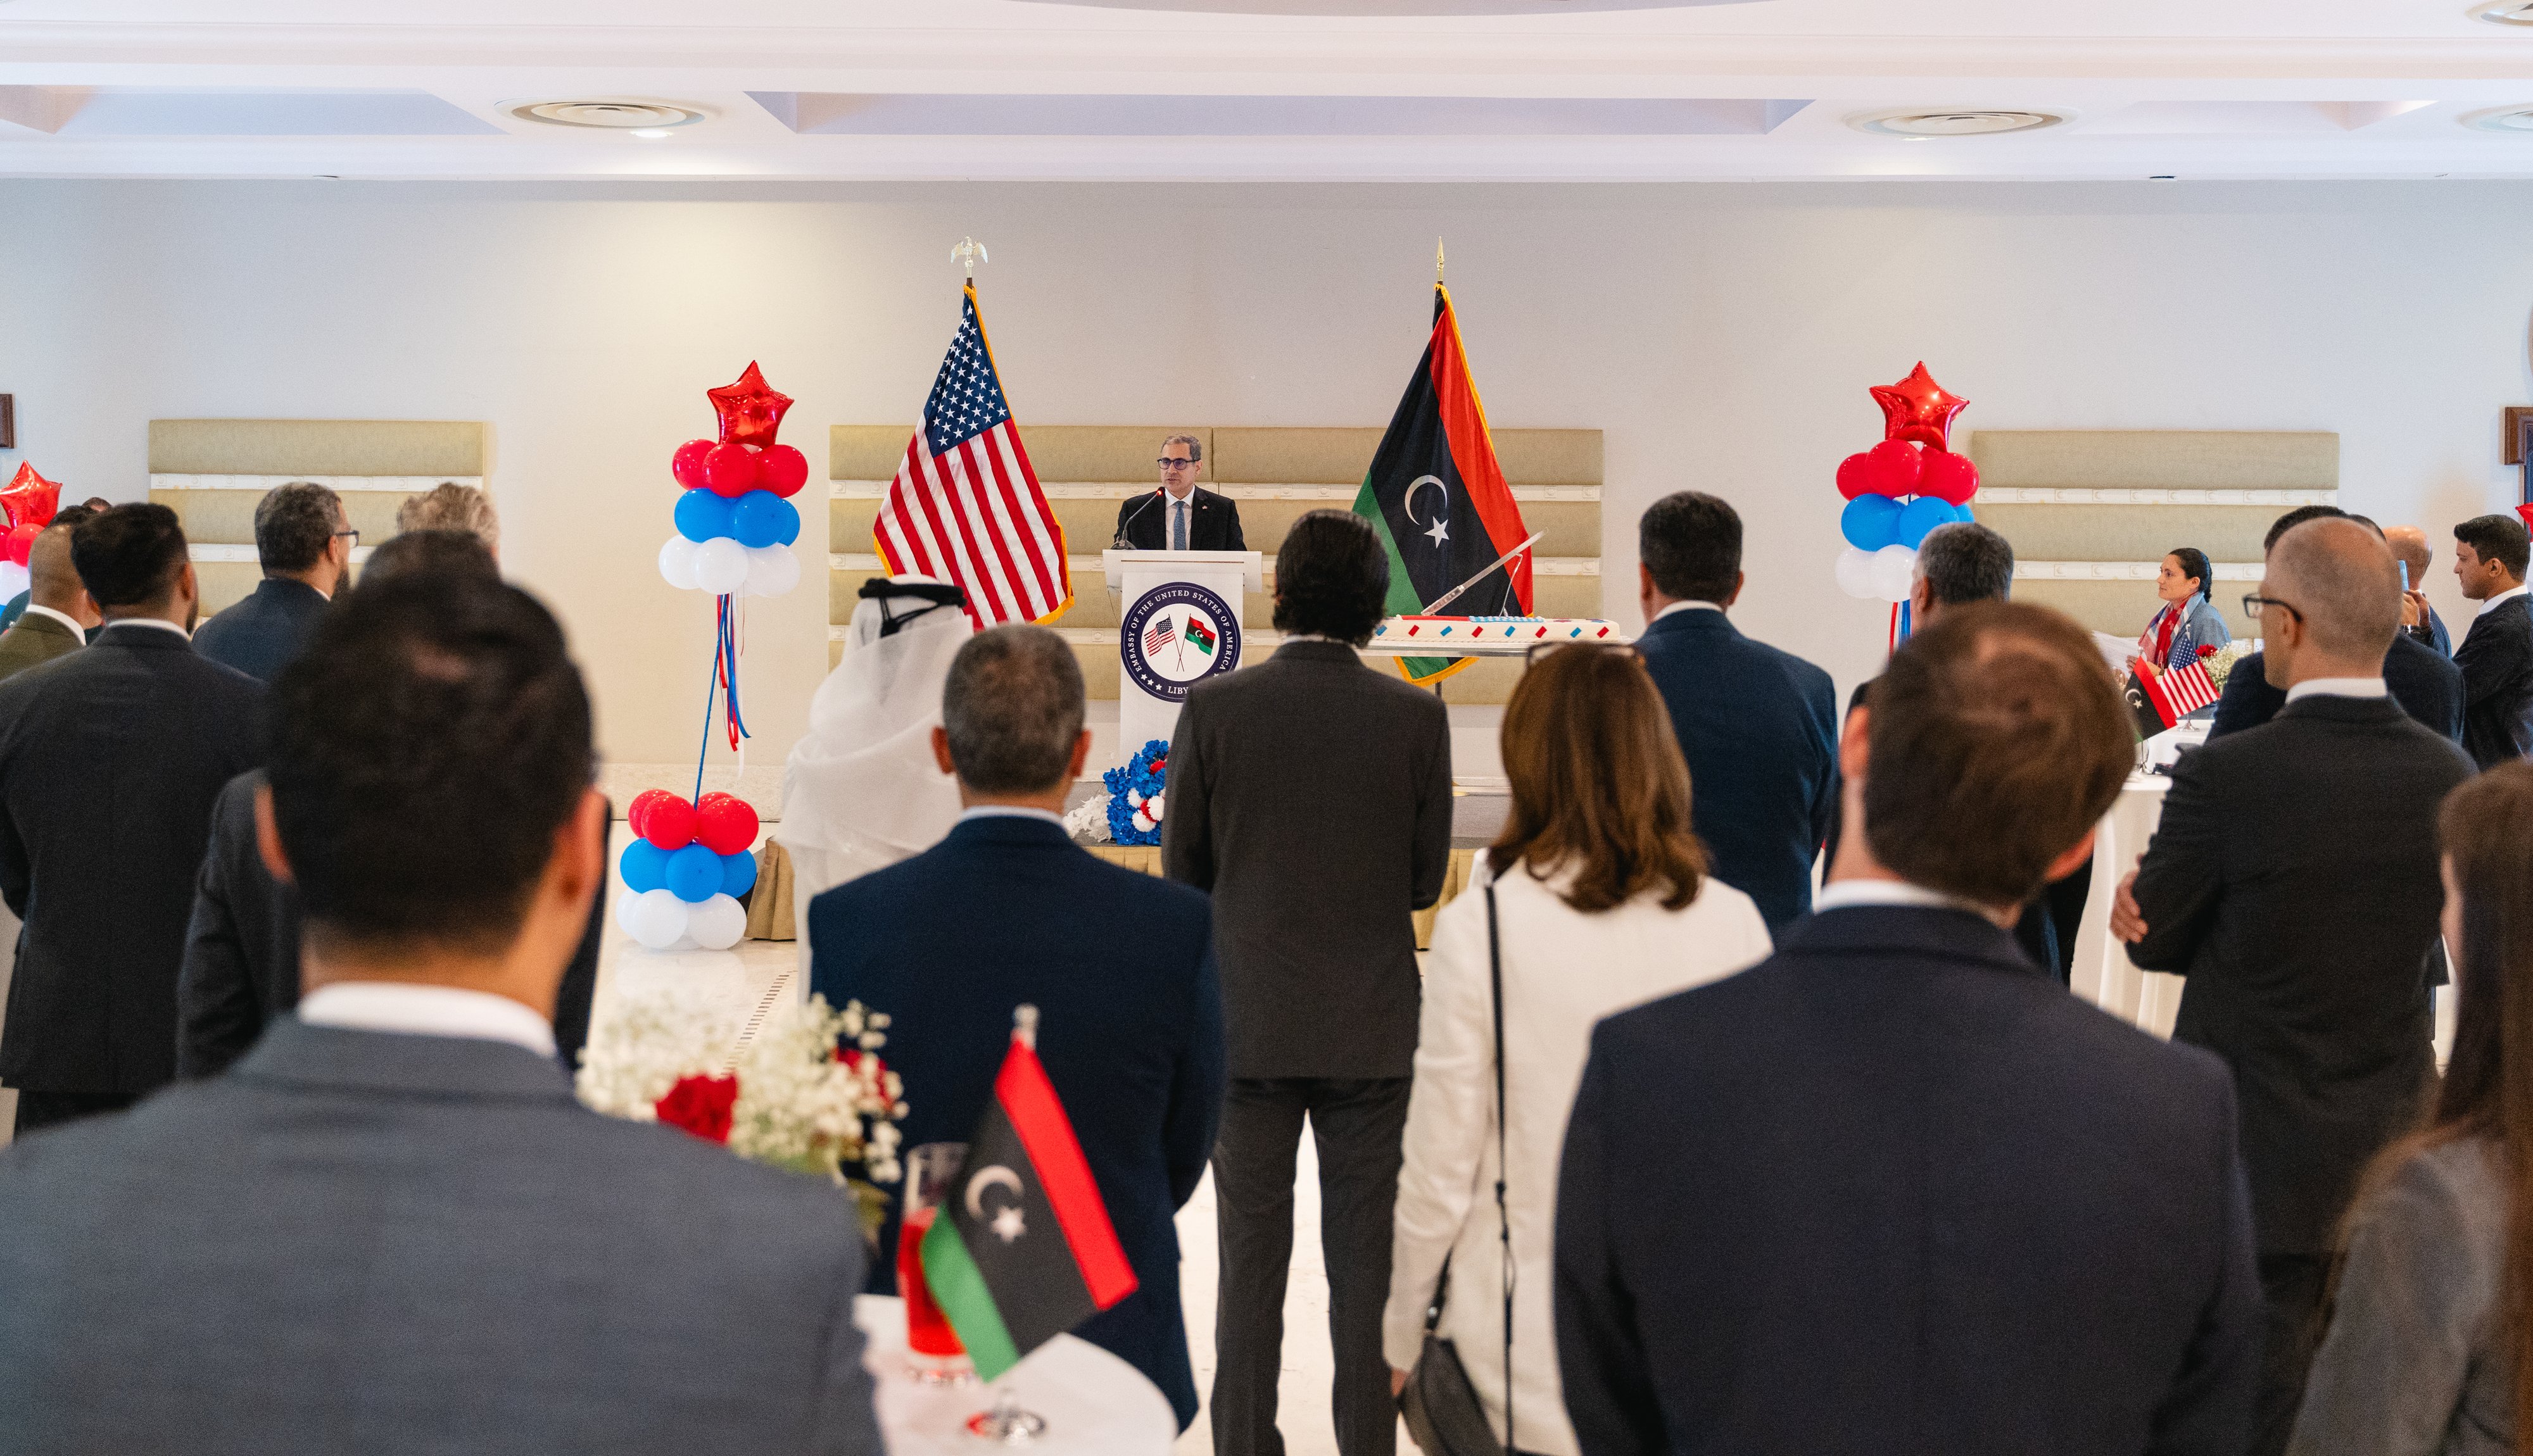 Brent: Libyan participated in the celebration of the anniversary of the independence of the United States.